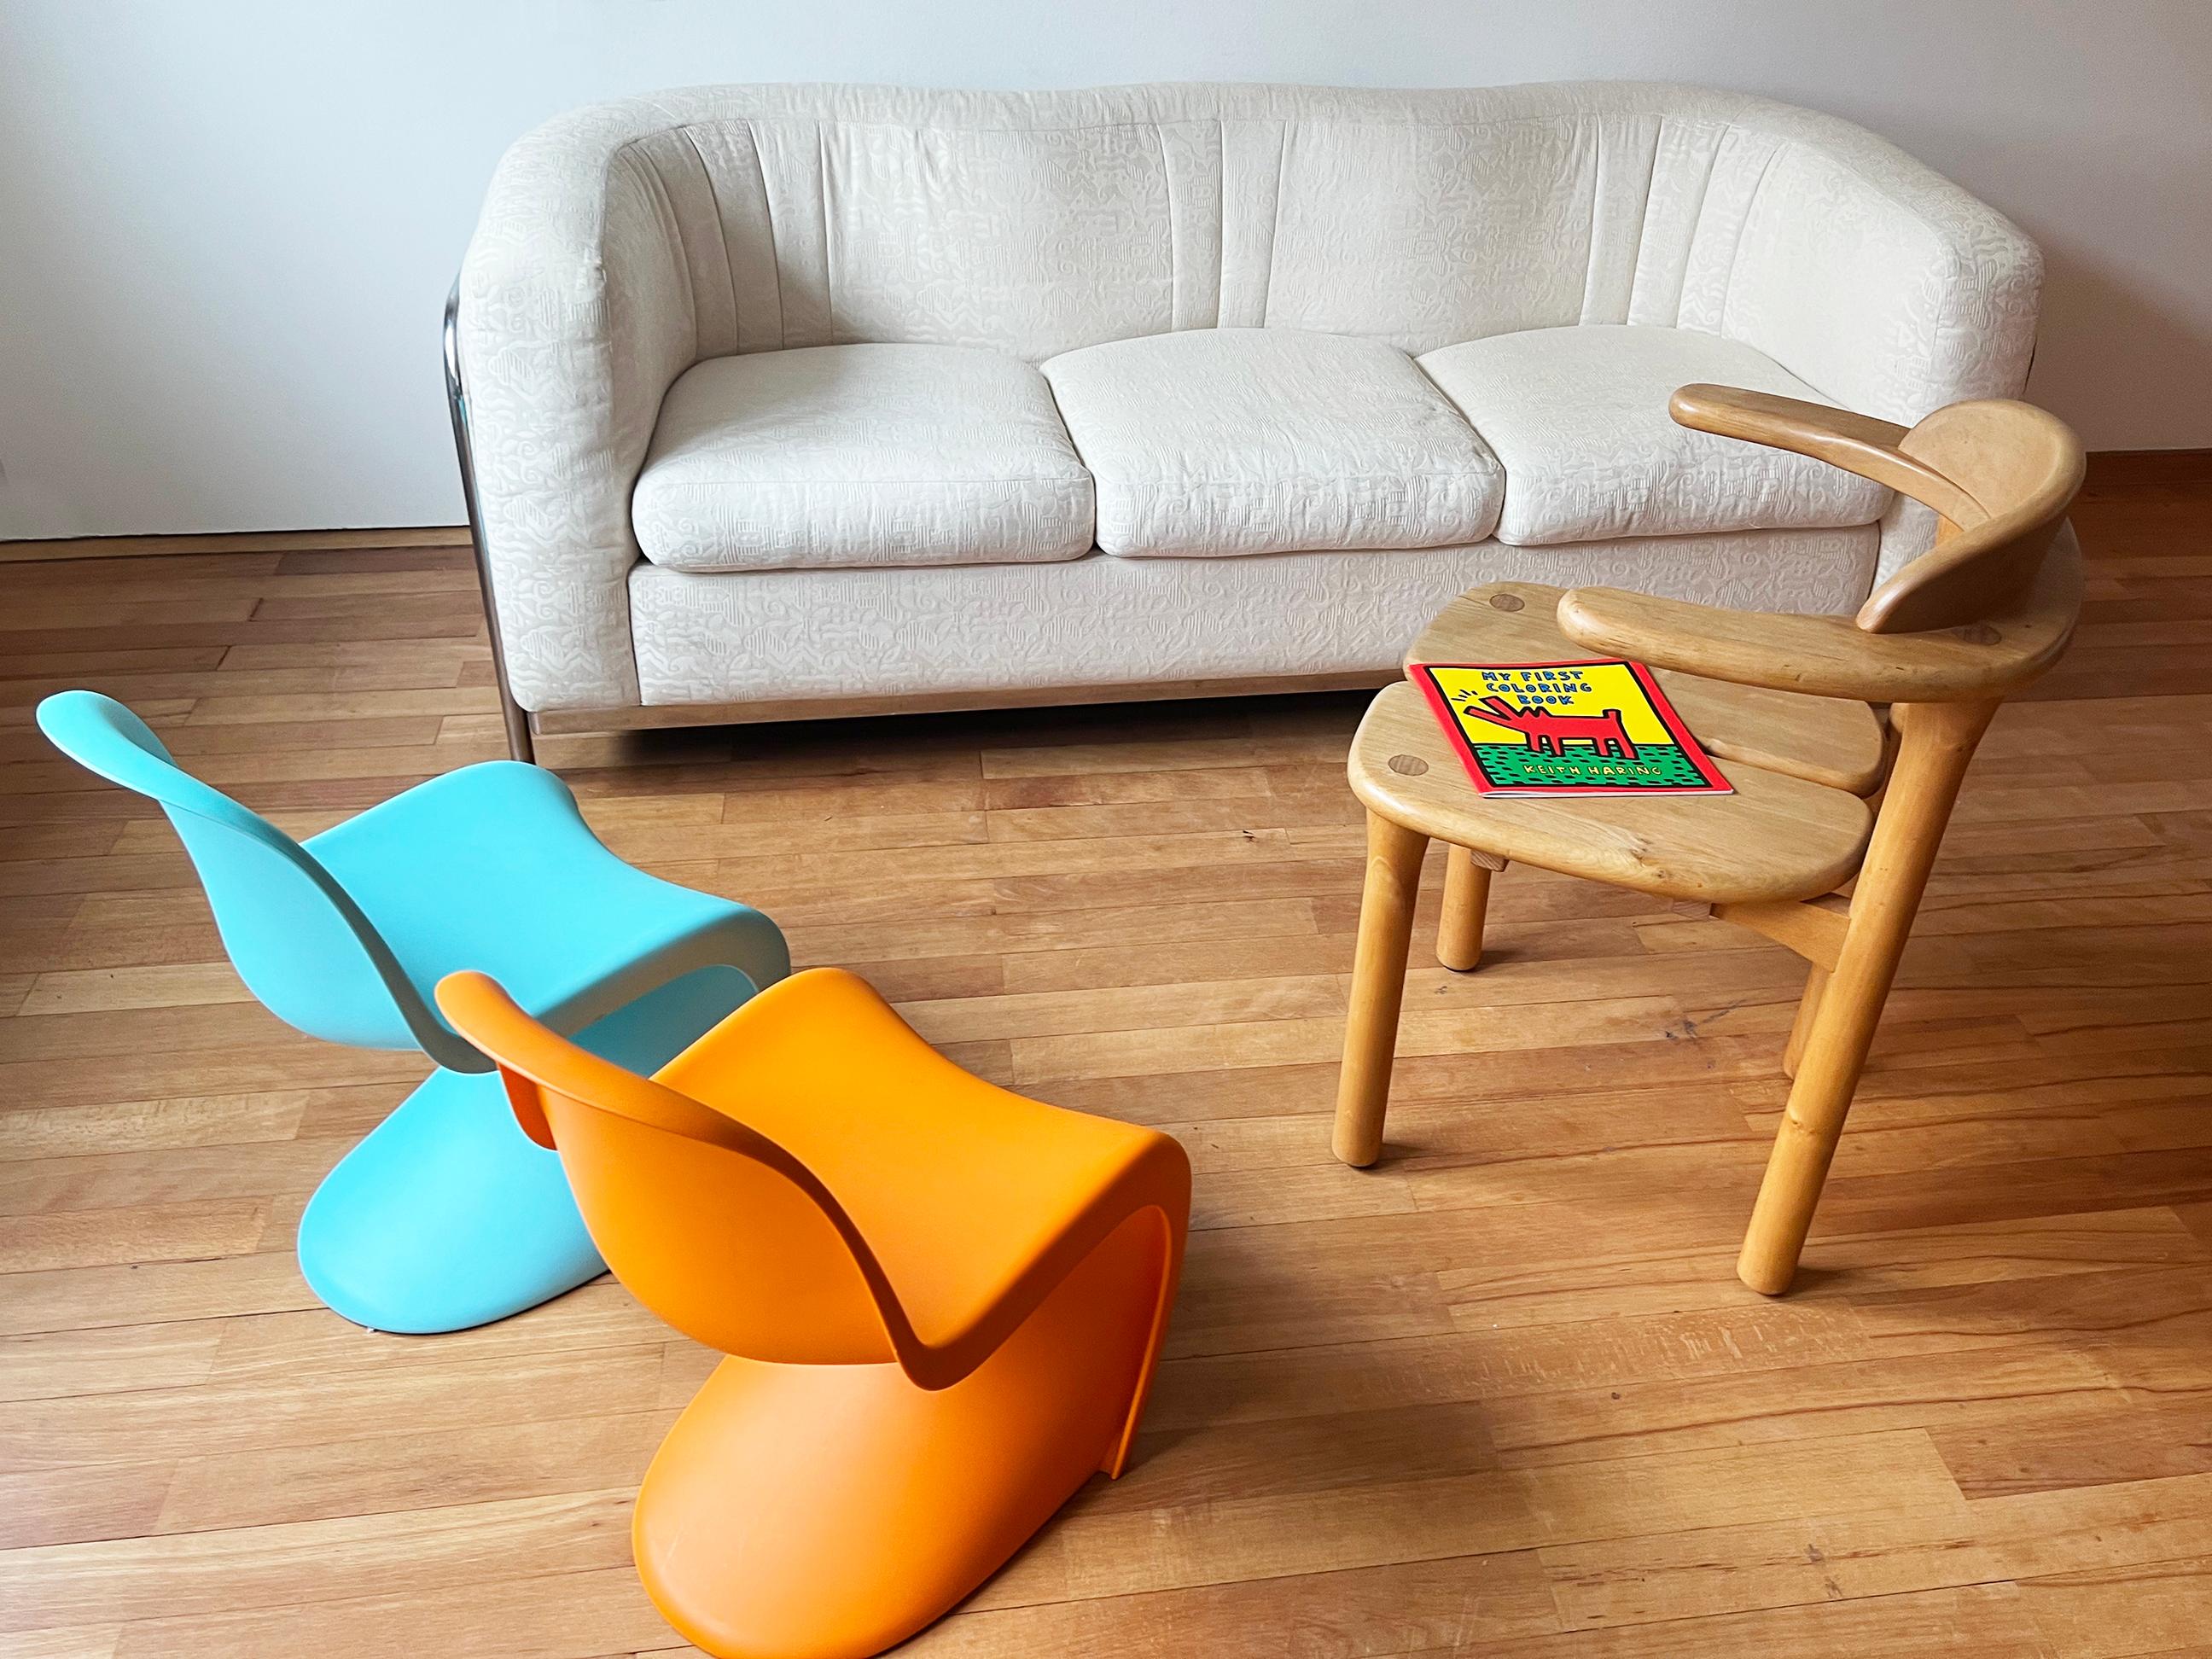 MCM Panton Junior PAIR of Kids Chairs by Verner Panton Vitra, Turquoise + Orange In Good Condition For Sale In Basel, BS